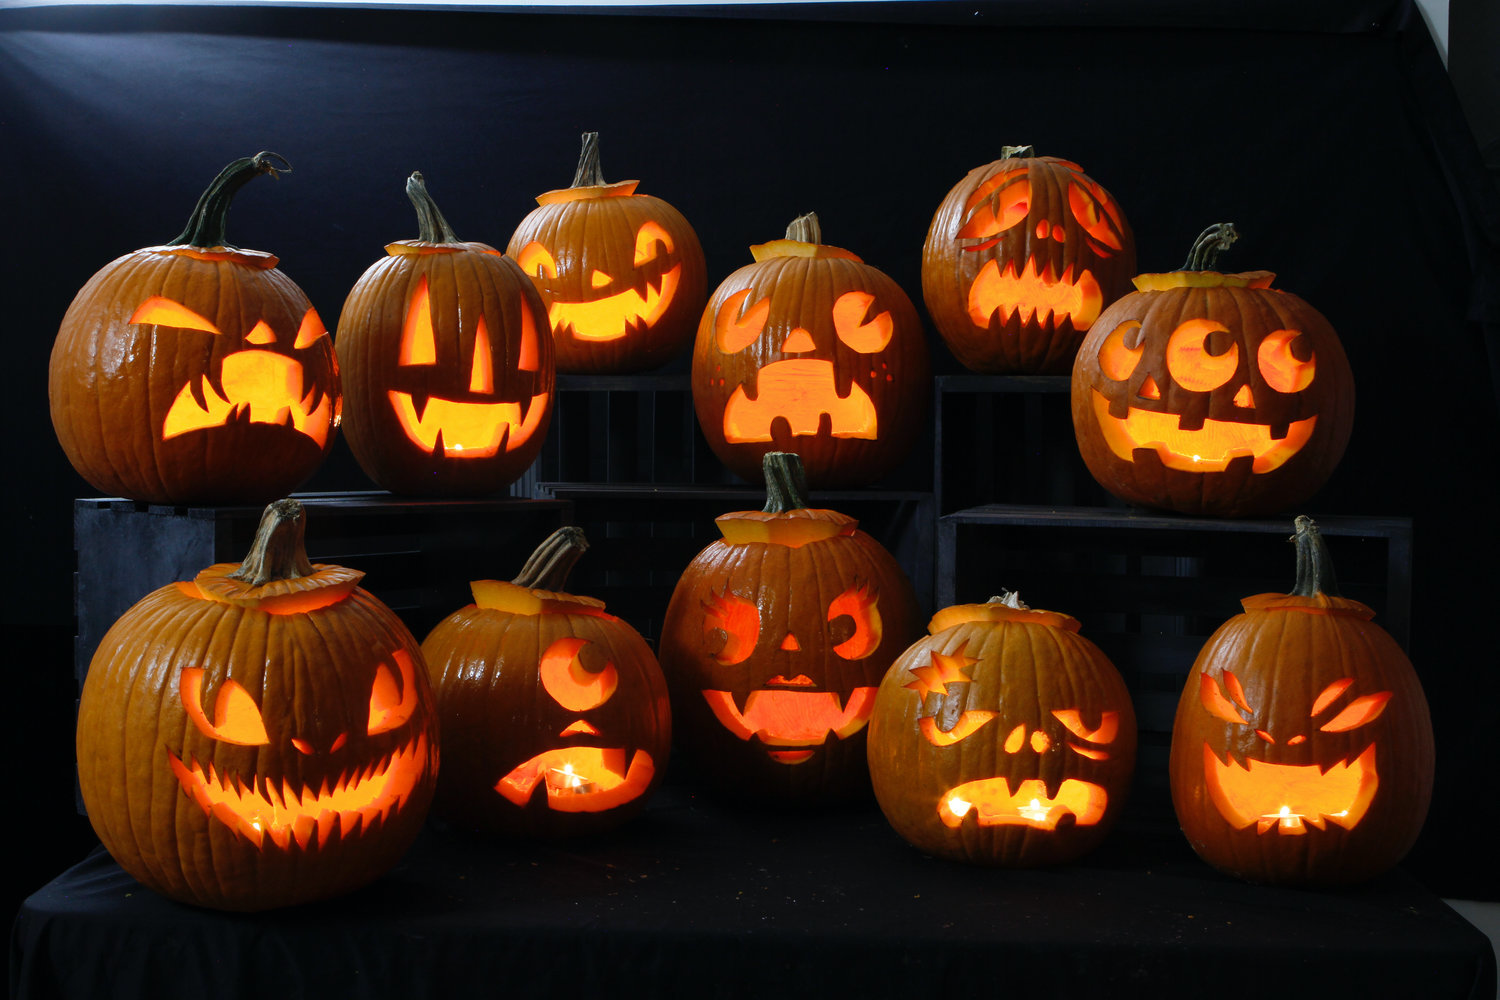 Jack O Lantern Carving Tips For Students The Guilfordian